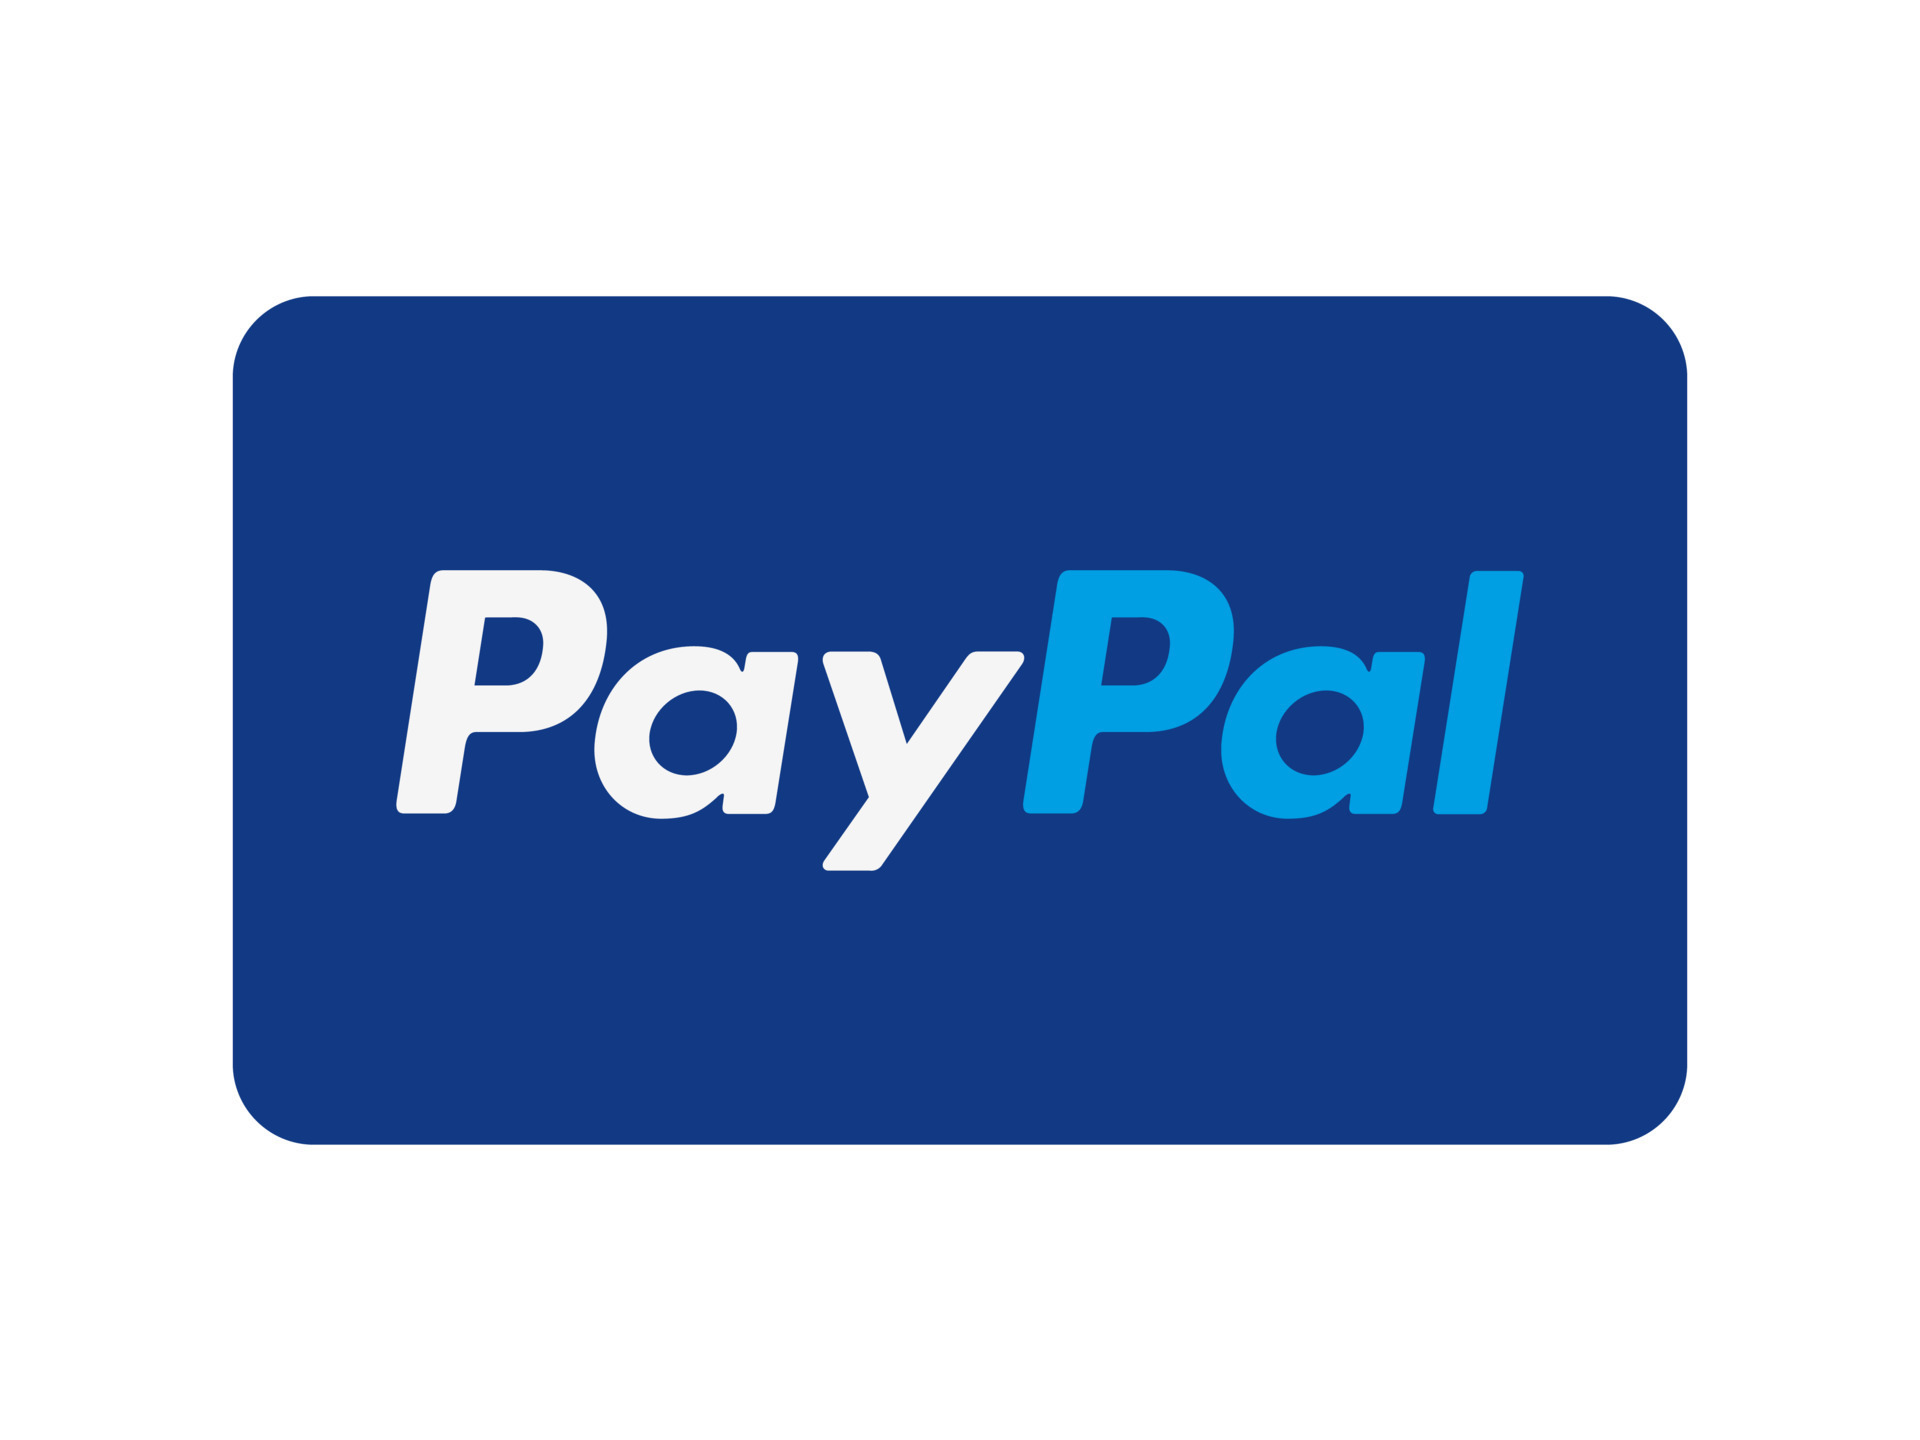 PayPal账号被<span style='color:red;'>关联</span>！跨境卖家如何自救？<span style='color:red;'>关于</span>PayPal防<span style='color:red;'>关联</span><span style='color:red;'>你</span>不得不<span style='color:red;'>知道</span><span style='color:red;'>的</span><span style='color:red;'>事</span>！